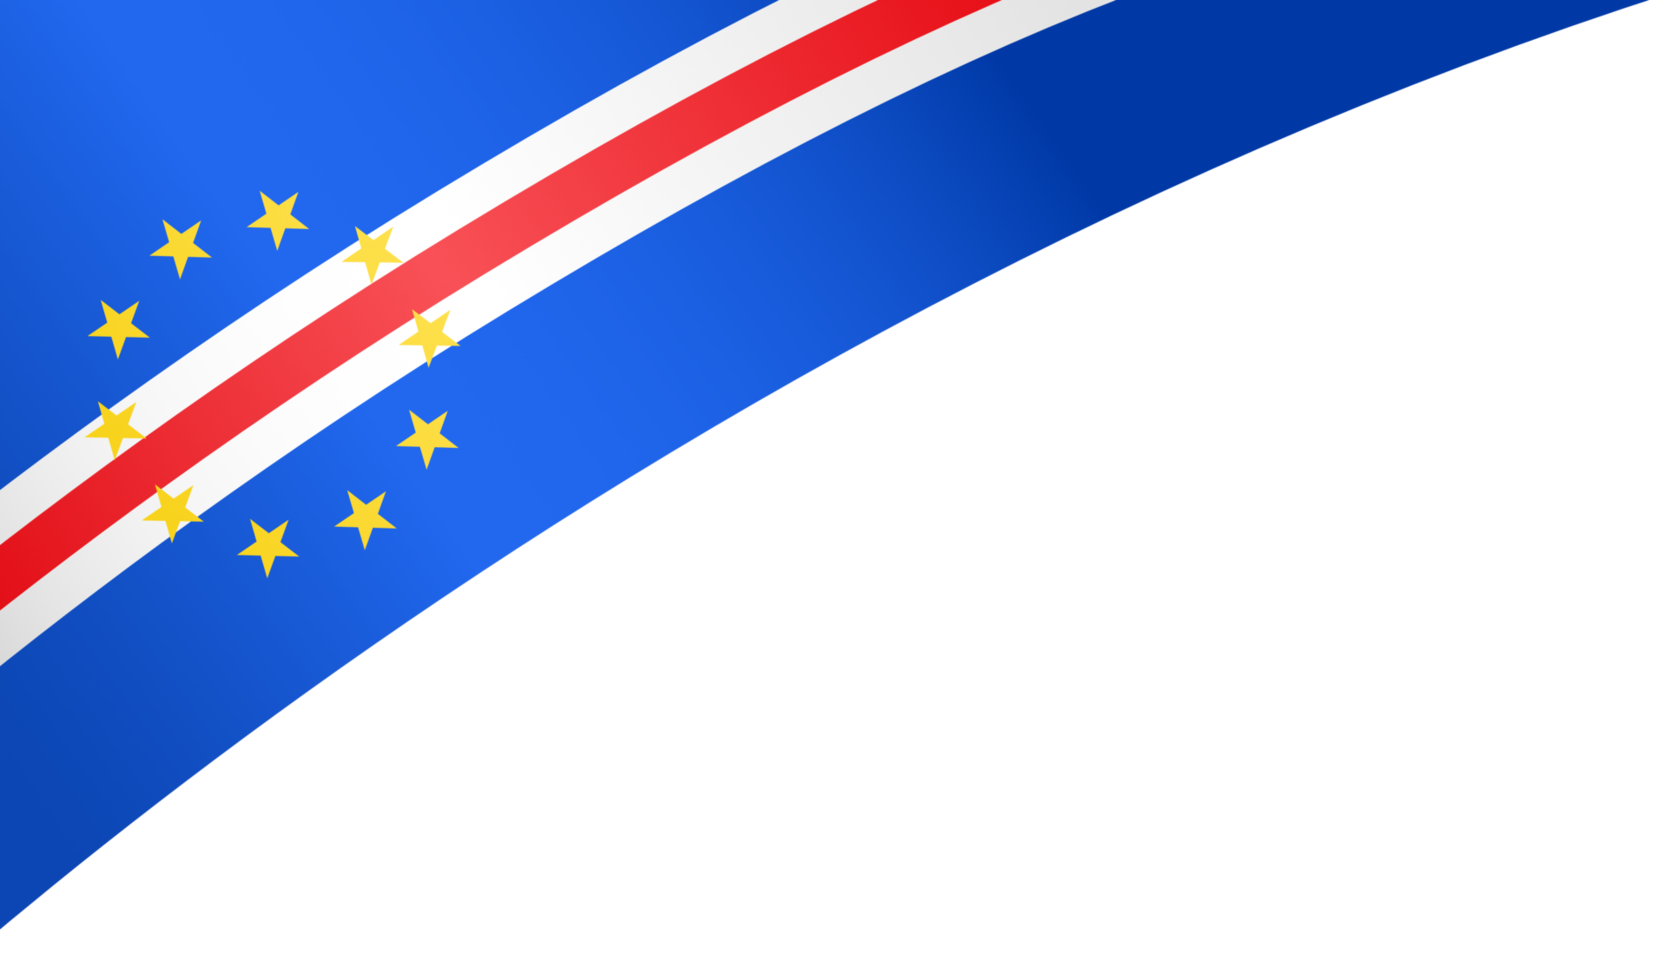 Cape Verde flag wave isolated on png or transparent background